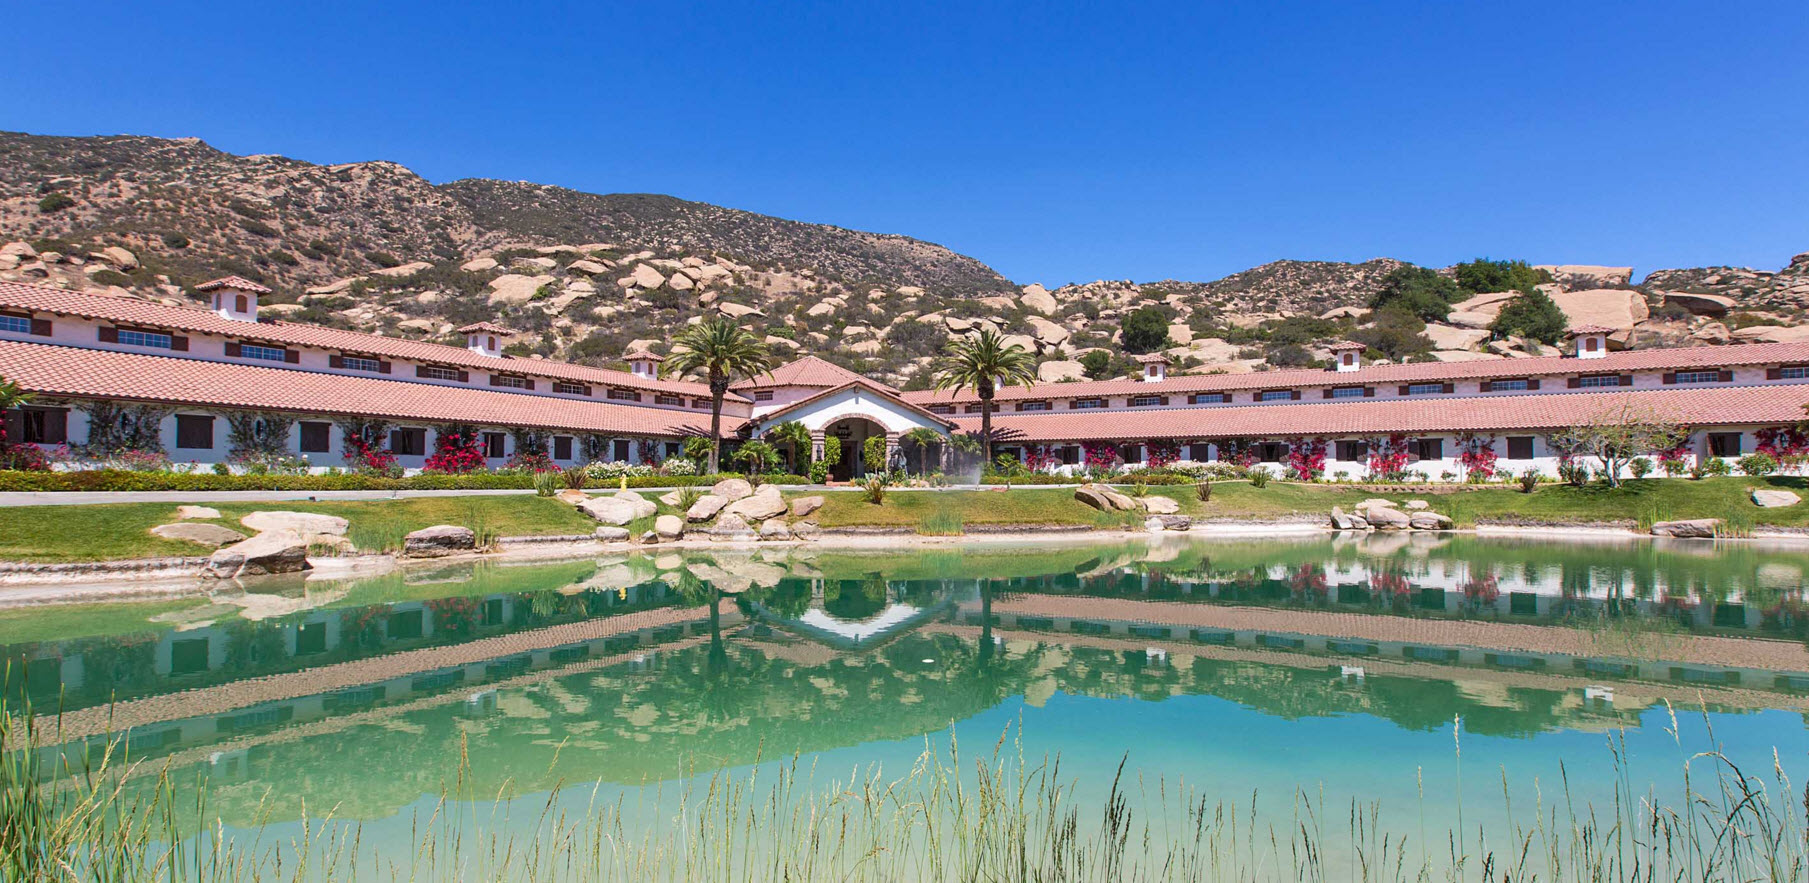 A hotel with a pond and mountains in the background.